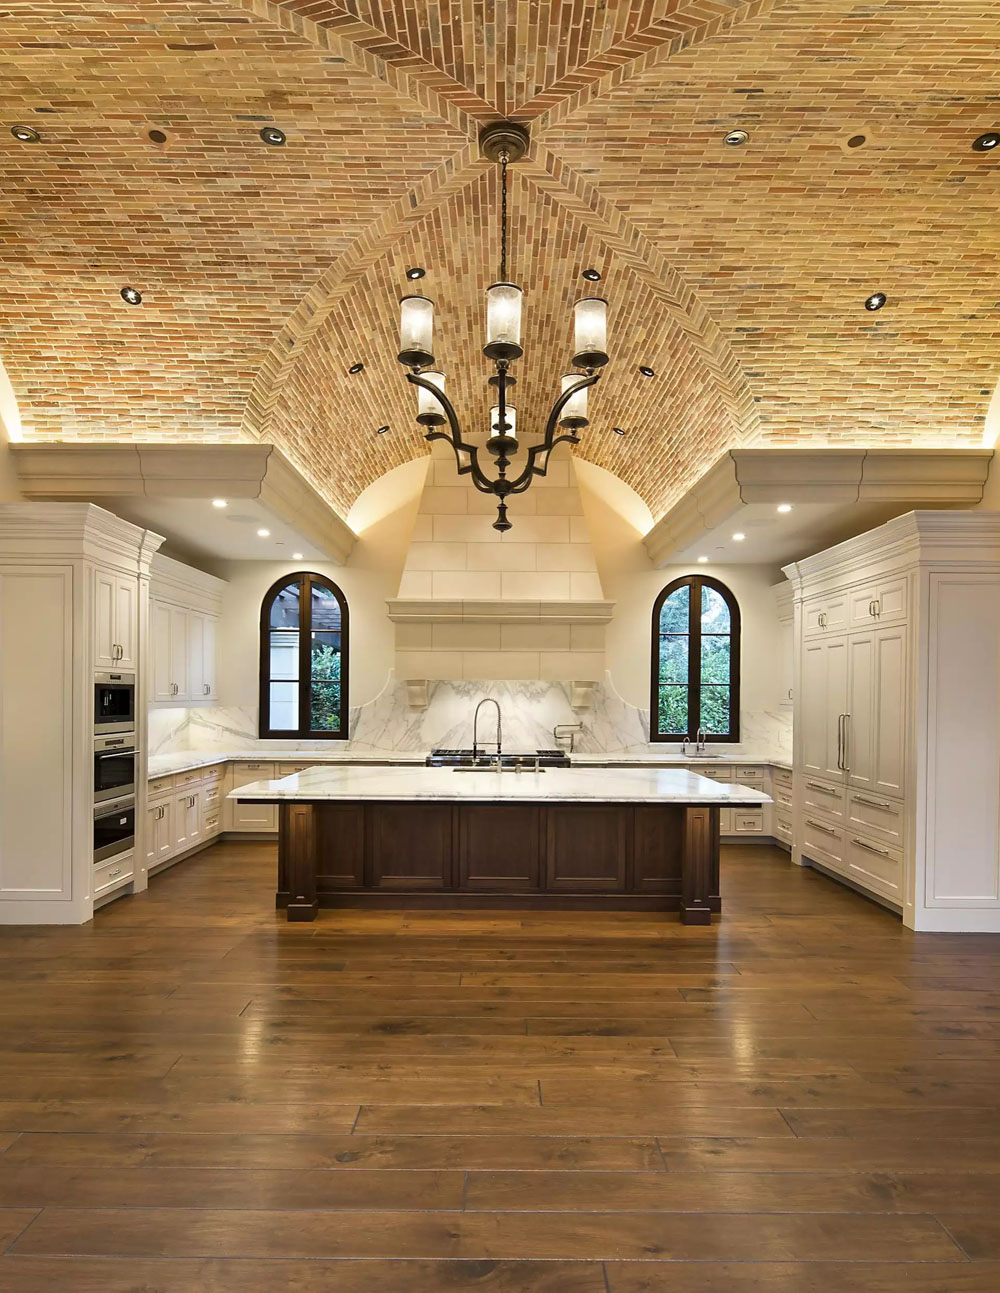 Kitchen with Arched Ceilings